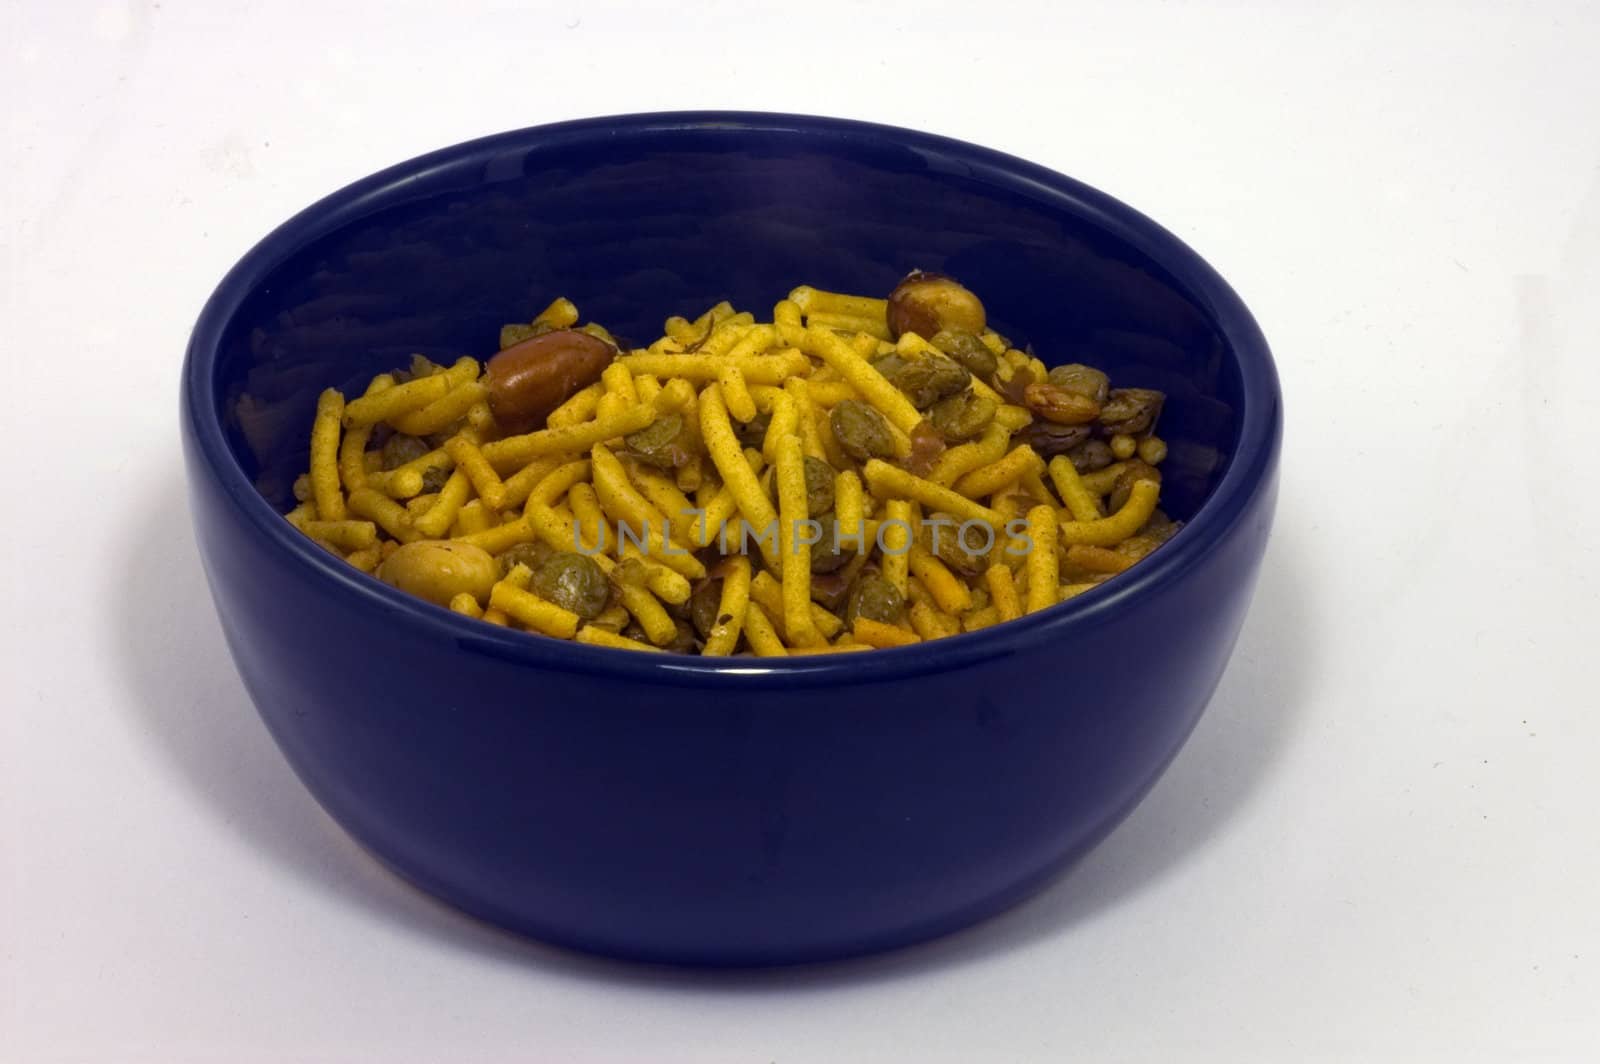 A blue bowl containing Bombay Mix snack